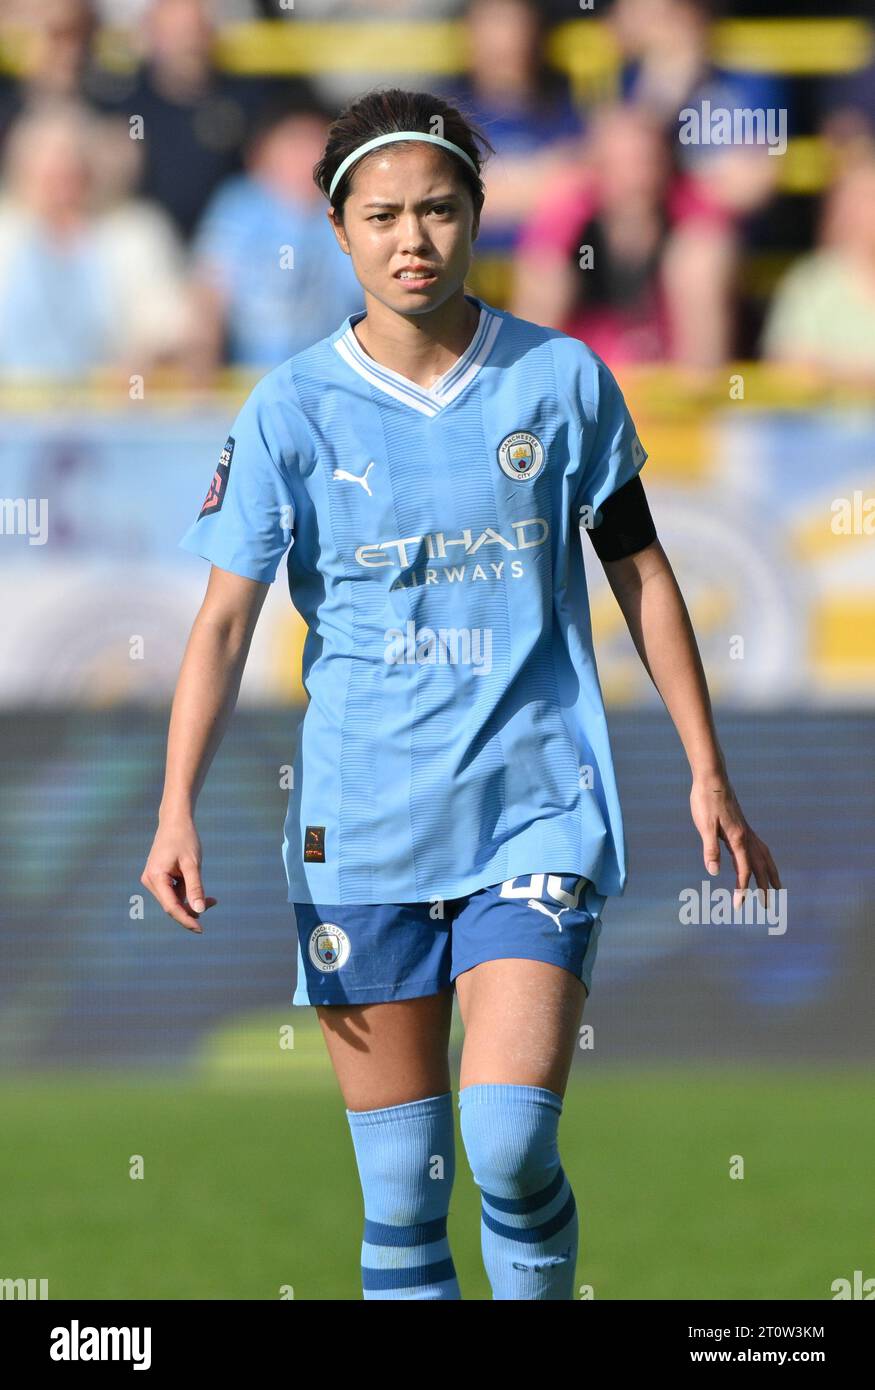 Joie Stadium, Sportcity, Manchester, England. 8th October 2023. Yui Hasegawa #25 of Manchester City Women Football Club, during Manchester City Women Football Club V Chelsea Women Football Club at Joie Stadium, in the Barclays Women's Super League/Women’s Super League. (Credit Image: ©Cody Froggatt/Alamy Live News) Stock Photo